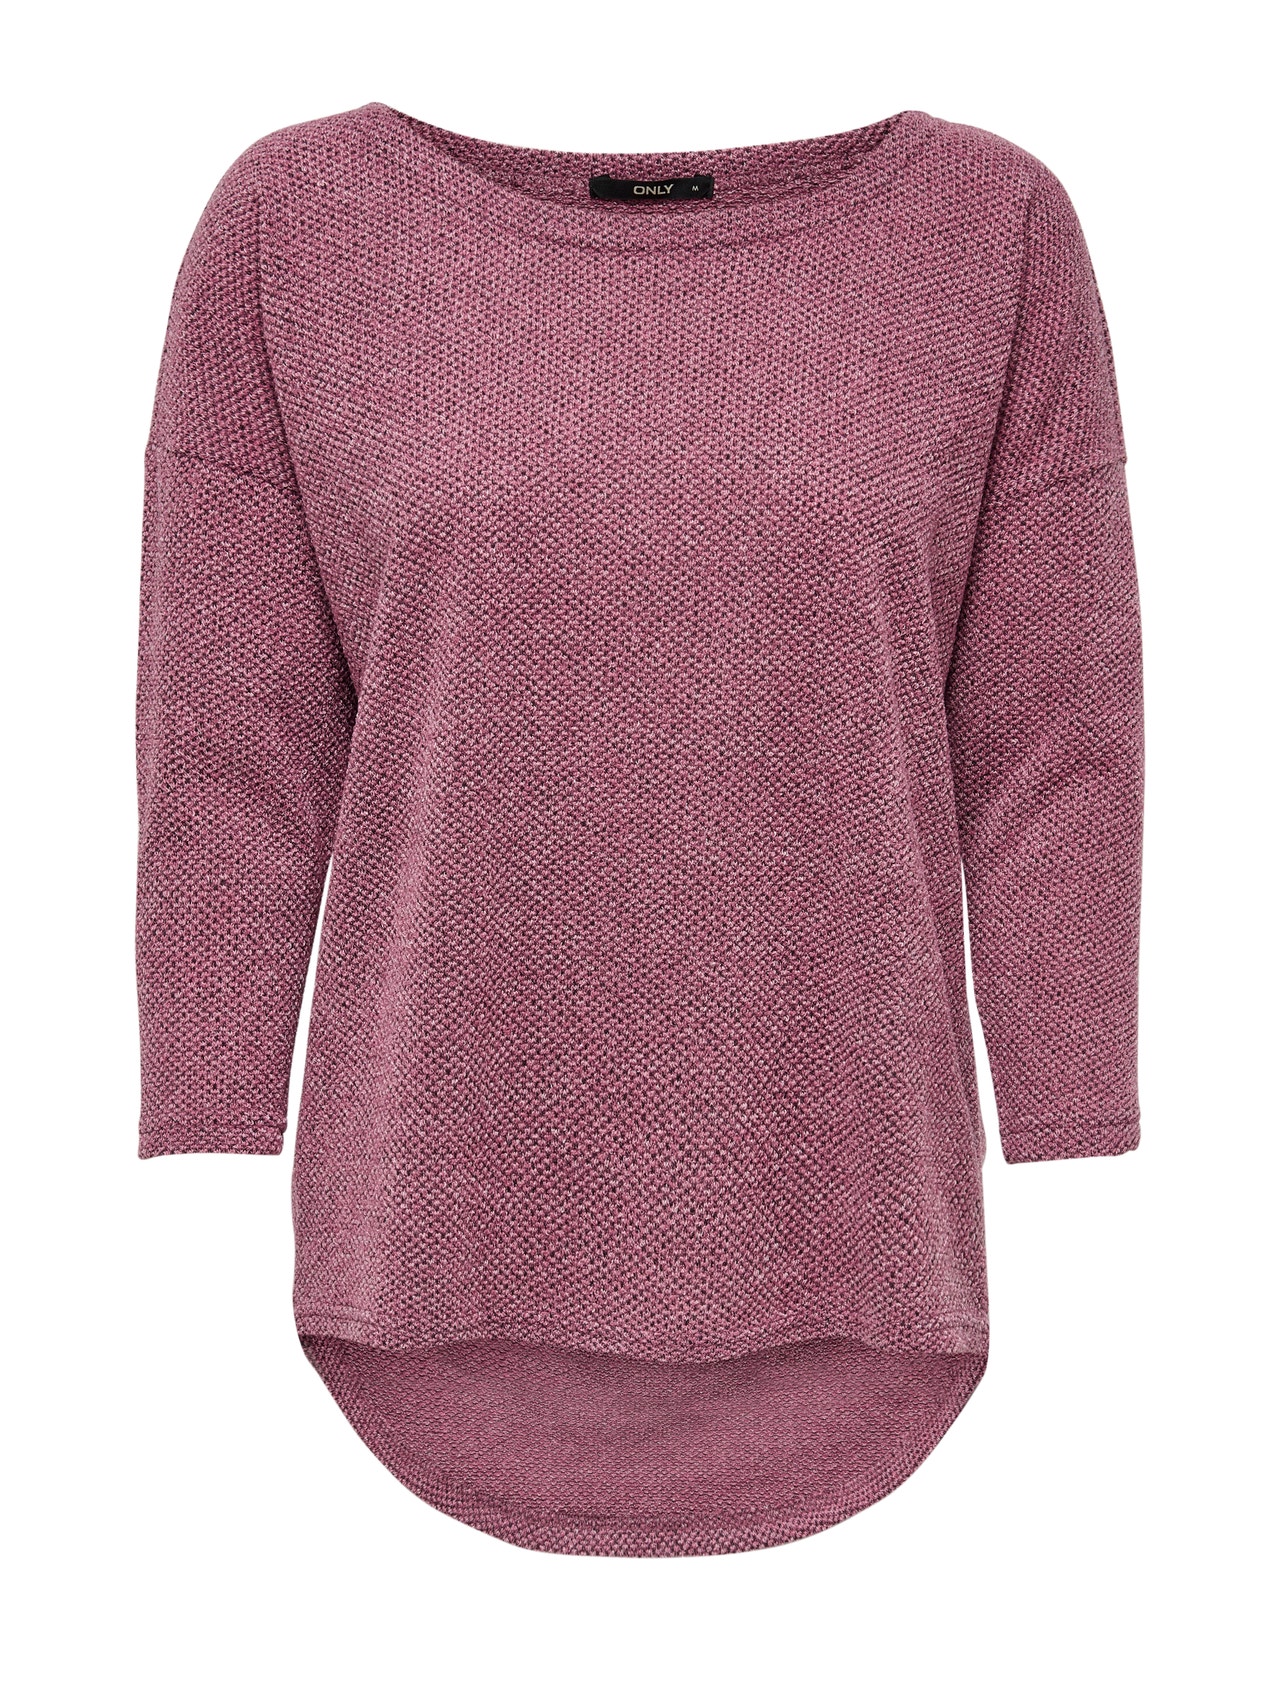 ONLY Loose Fit Round Neck Top -Dry Rose - 15177776